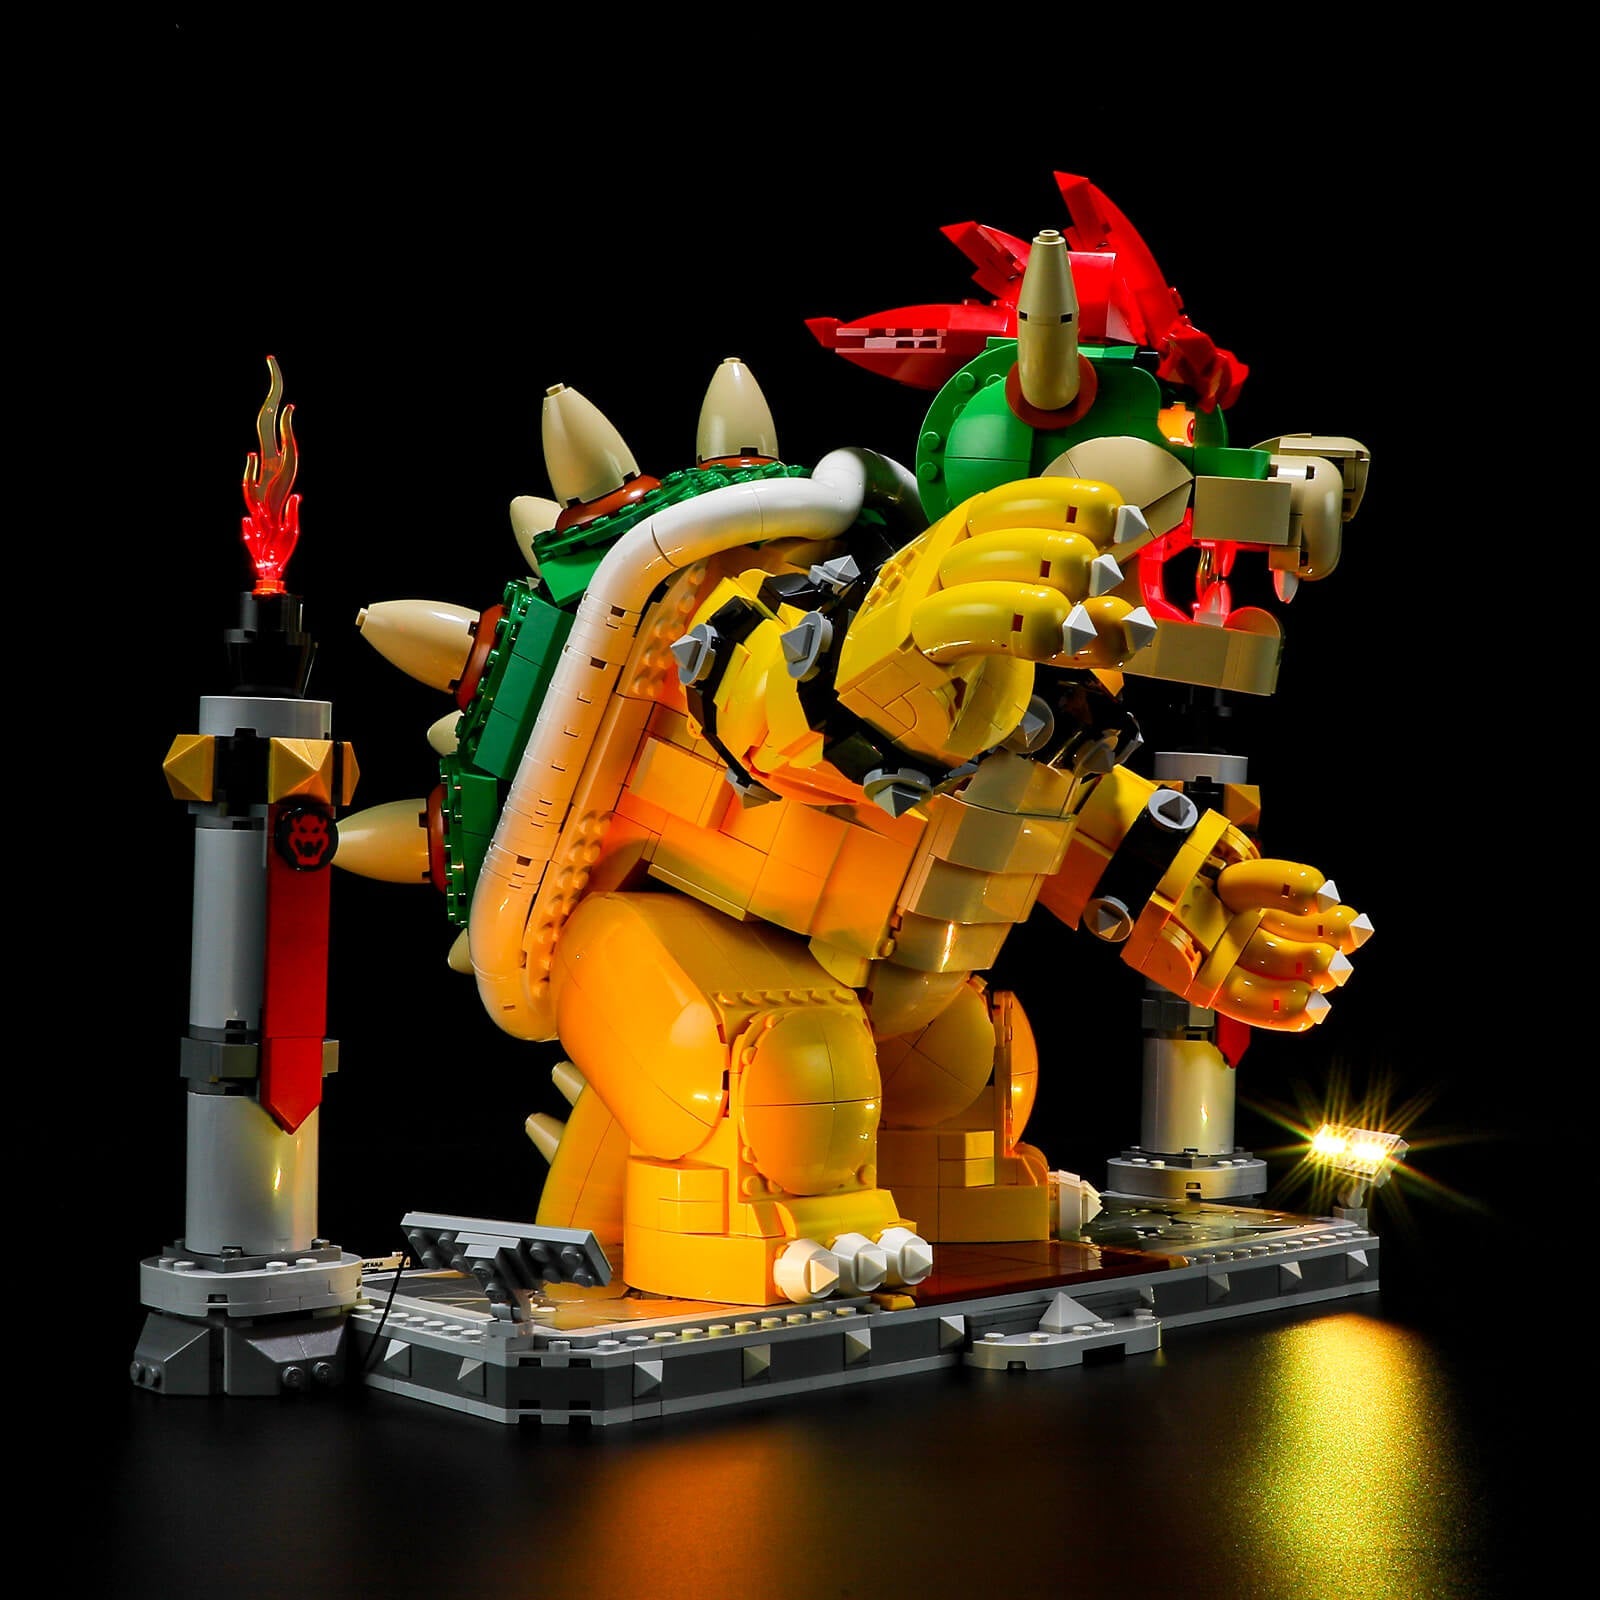 Light up The Mighty Bowser 71411